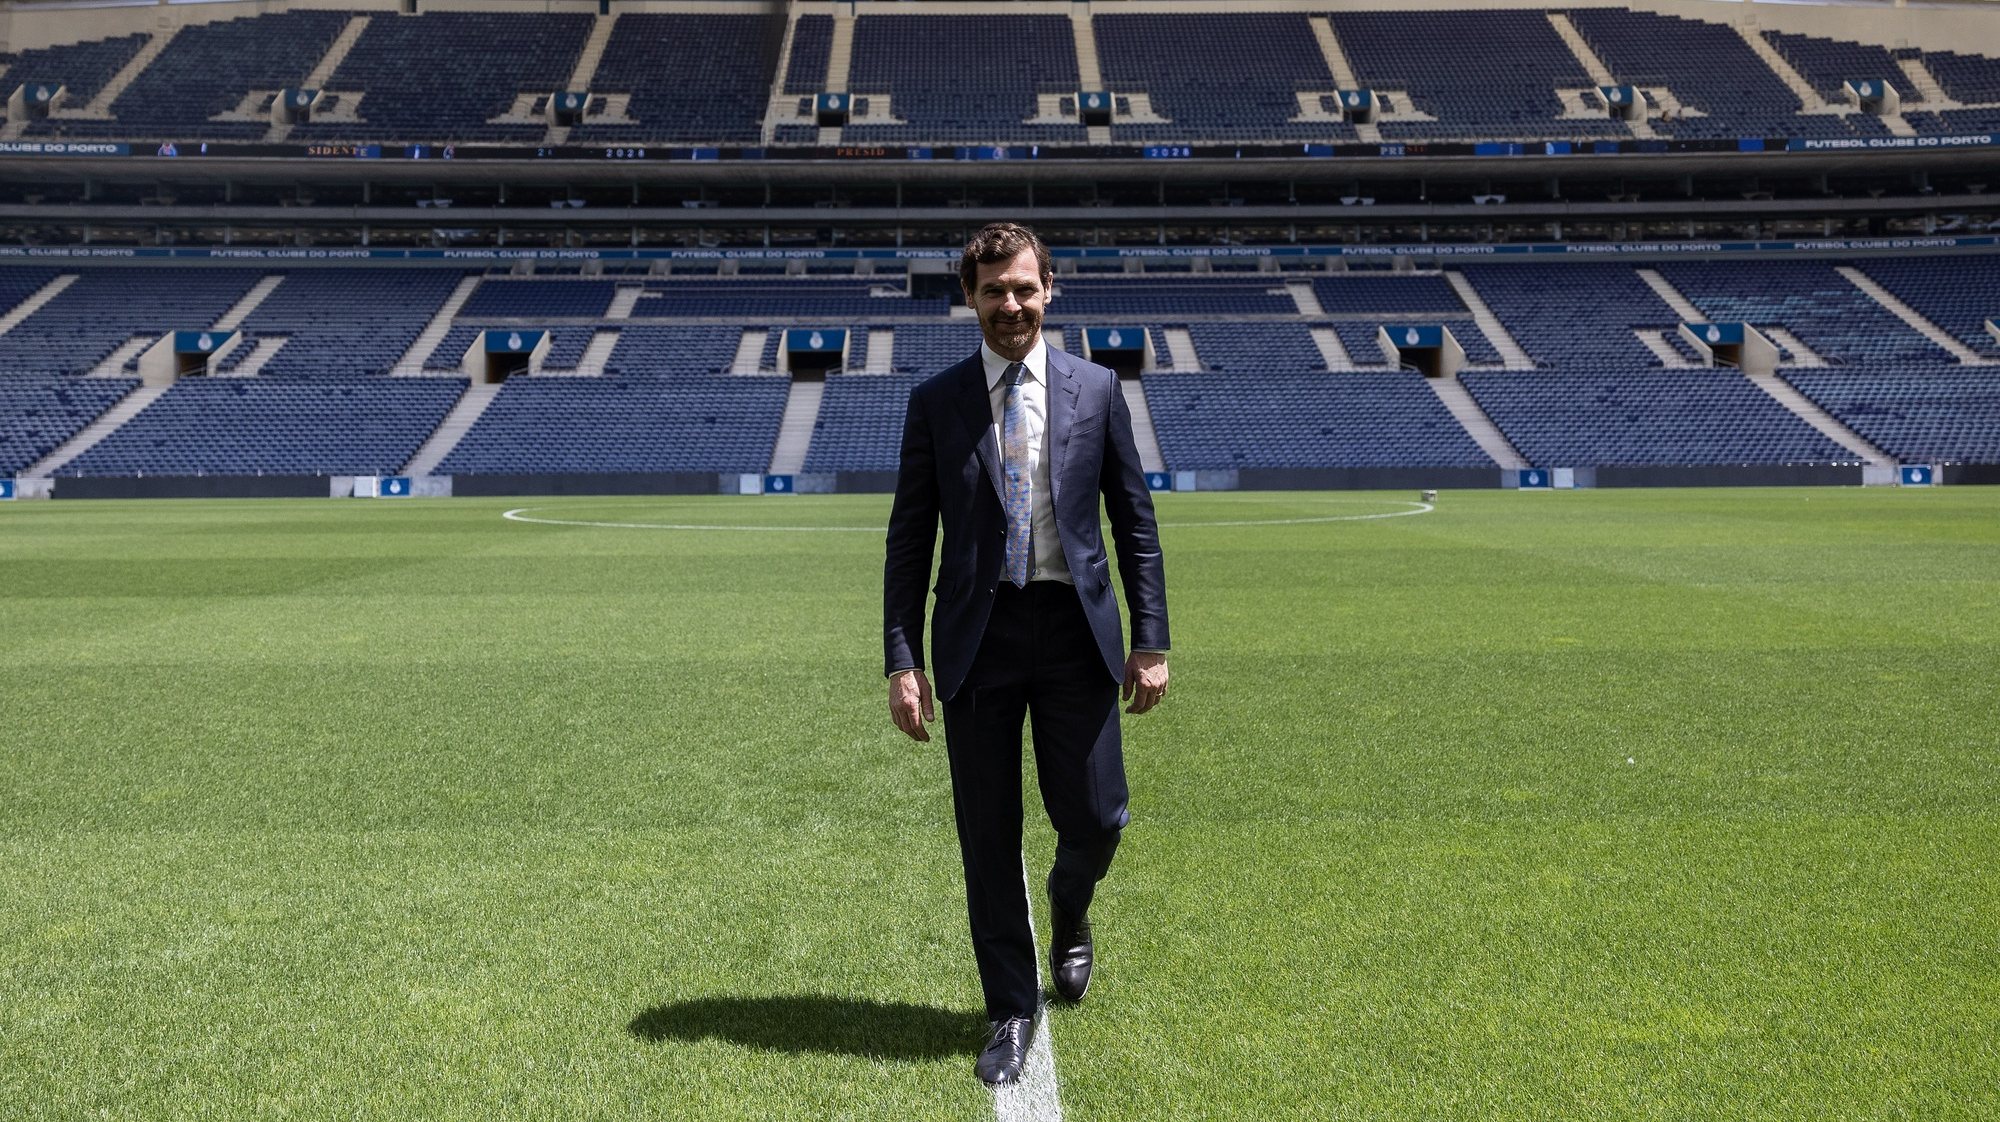 Andre Villas-Boas was sworn in this Tuesday as president of FC Porto in a ceremony at the Dragão stadium in Porto, Portugal, 7th May 2024. JOSE COELHO/LUSA